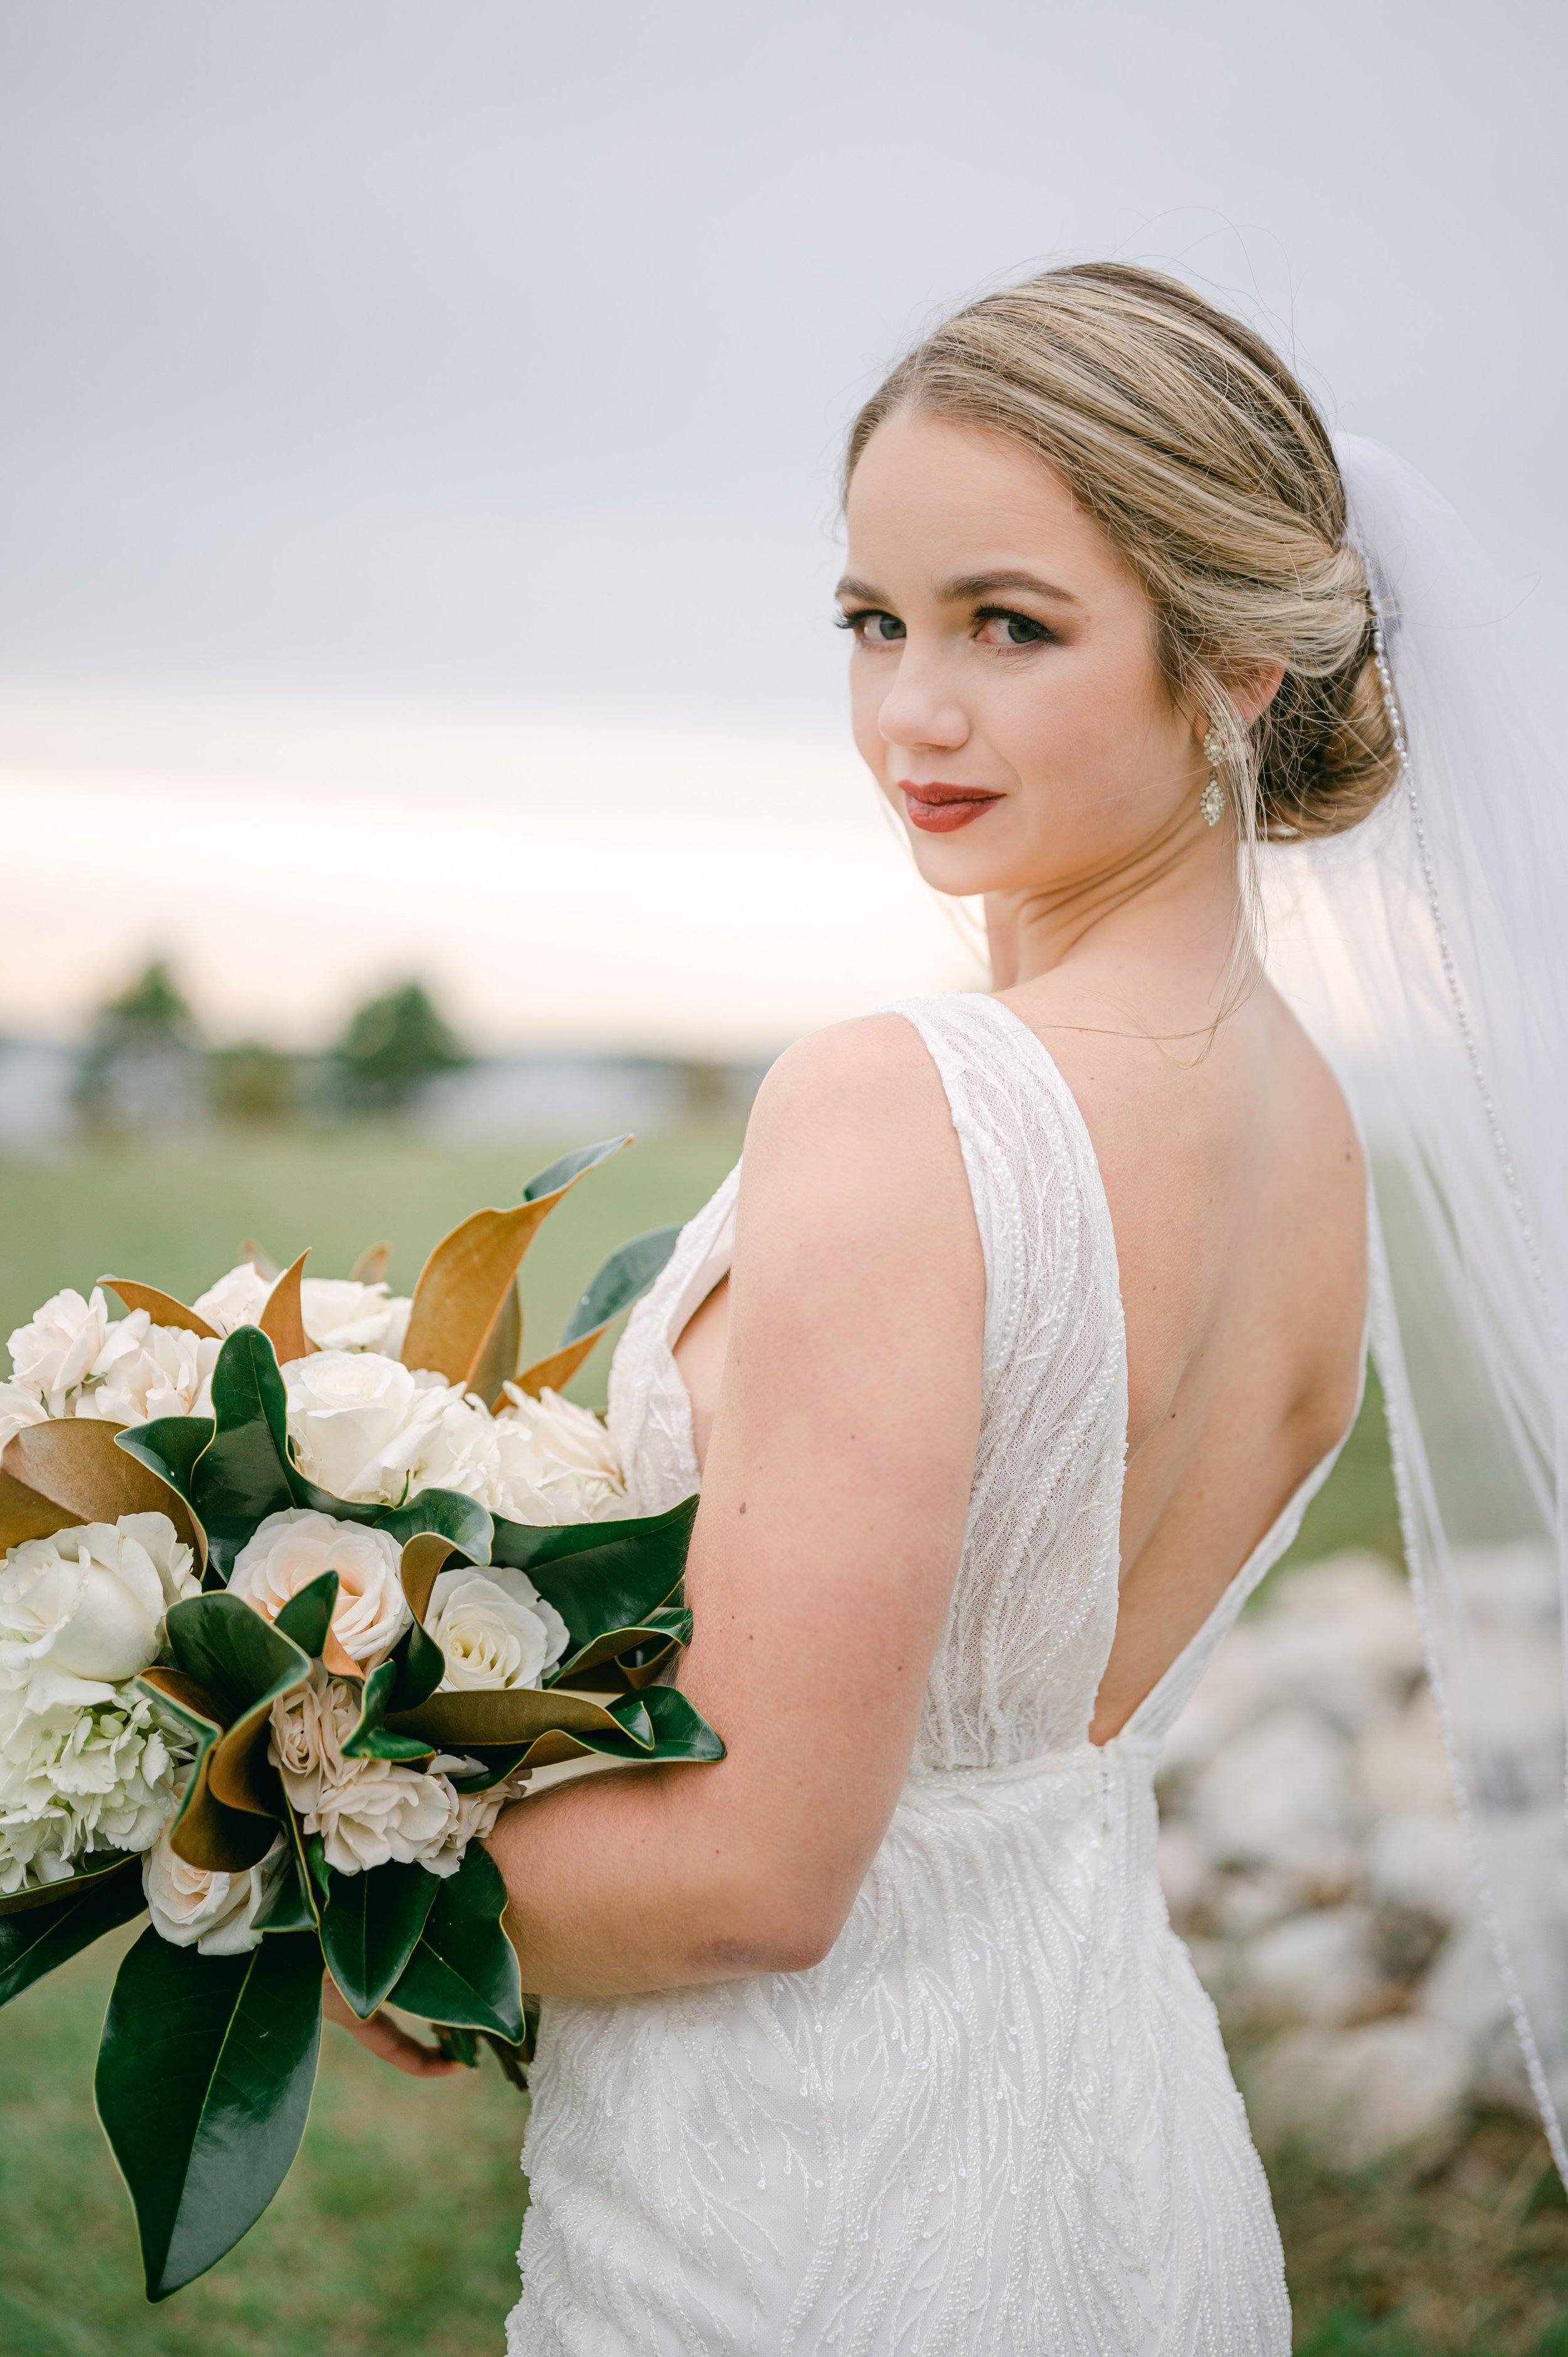 ivory-and-beau-bride-taylor-real-bride-ryder-made-with-love-wedding-dress-bridal-gown-wedding-gown-classic-bride-savannah-bridal-shop-bridal-boutique-bridal-shopping-bridal-style-bridal-inspo-2021-11-6 Taylor-and-Ben-Augusta-Wedding-Photographer161.jpg